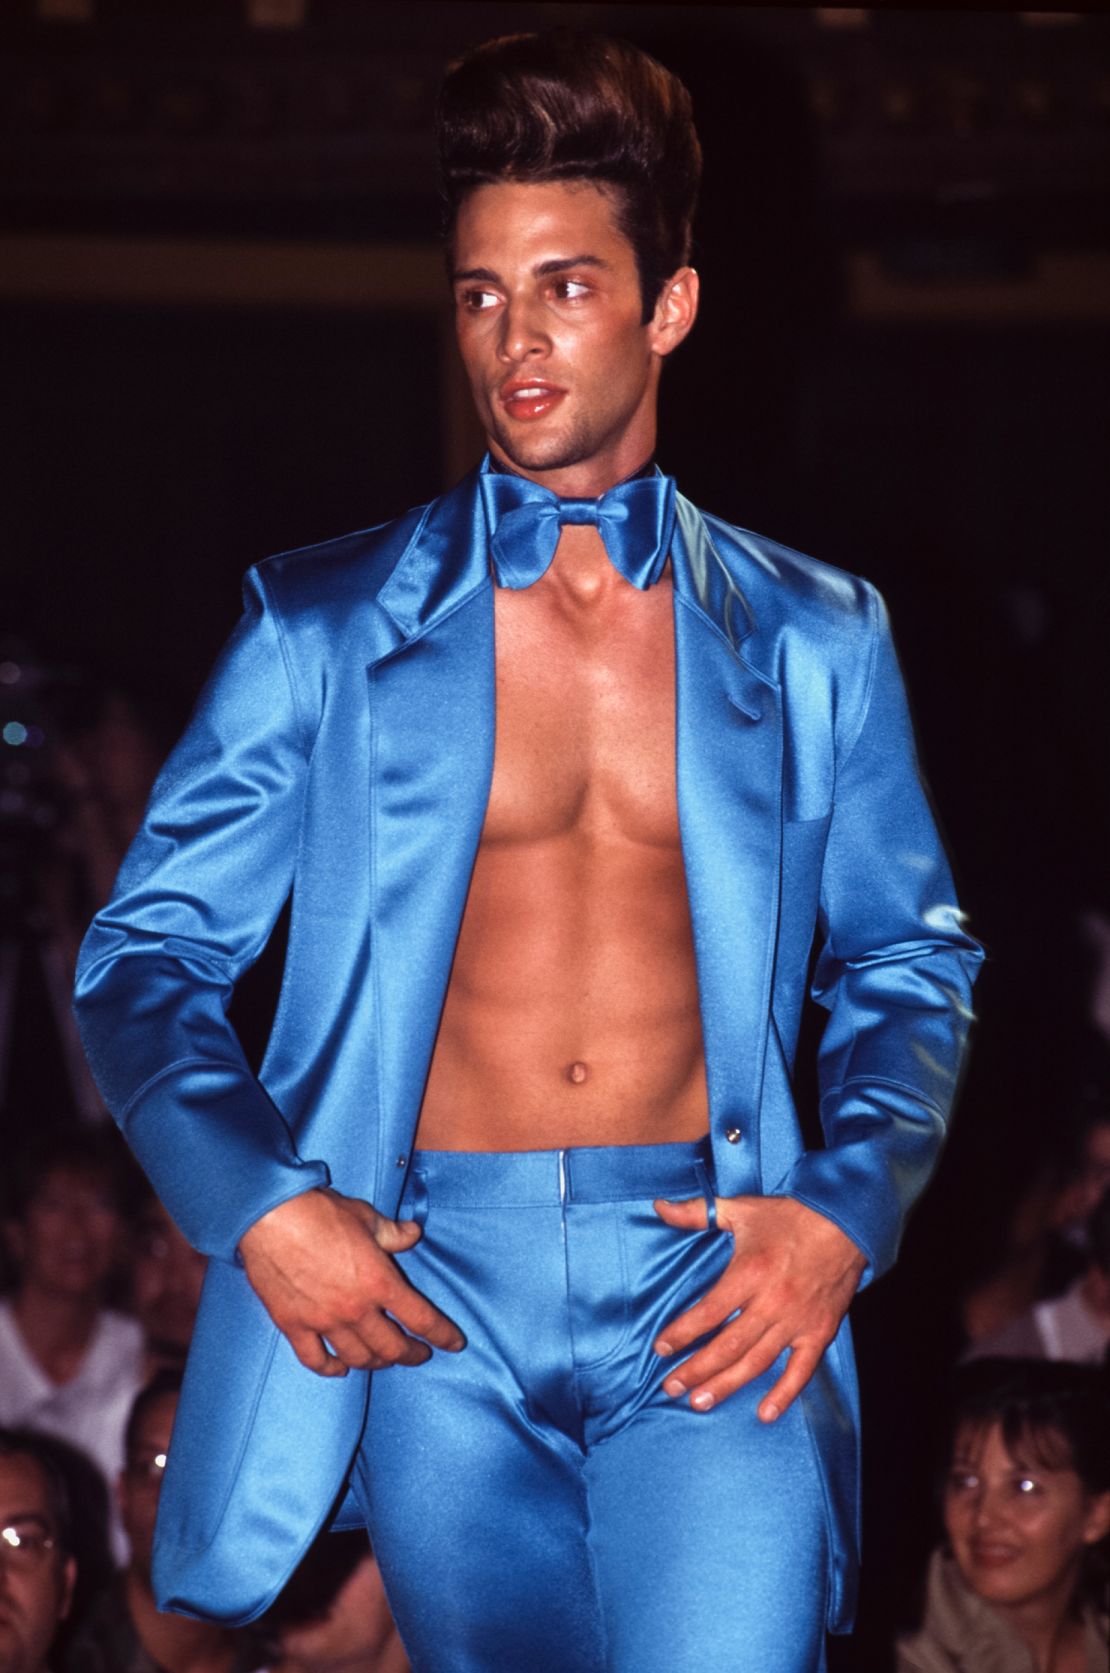 Jean-Paul Gaultier's "Pin Up Boys" from the 1996 season were early examples of the shirtless suit on the runway.